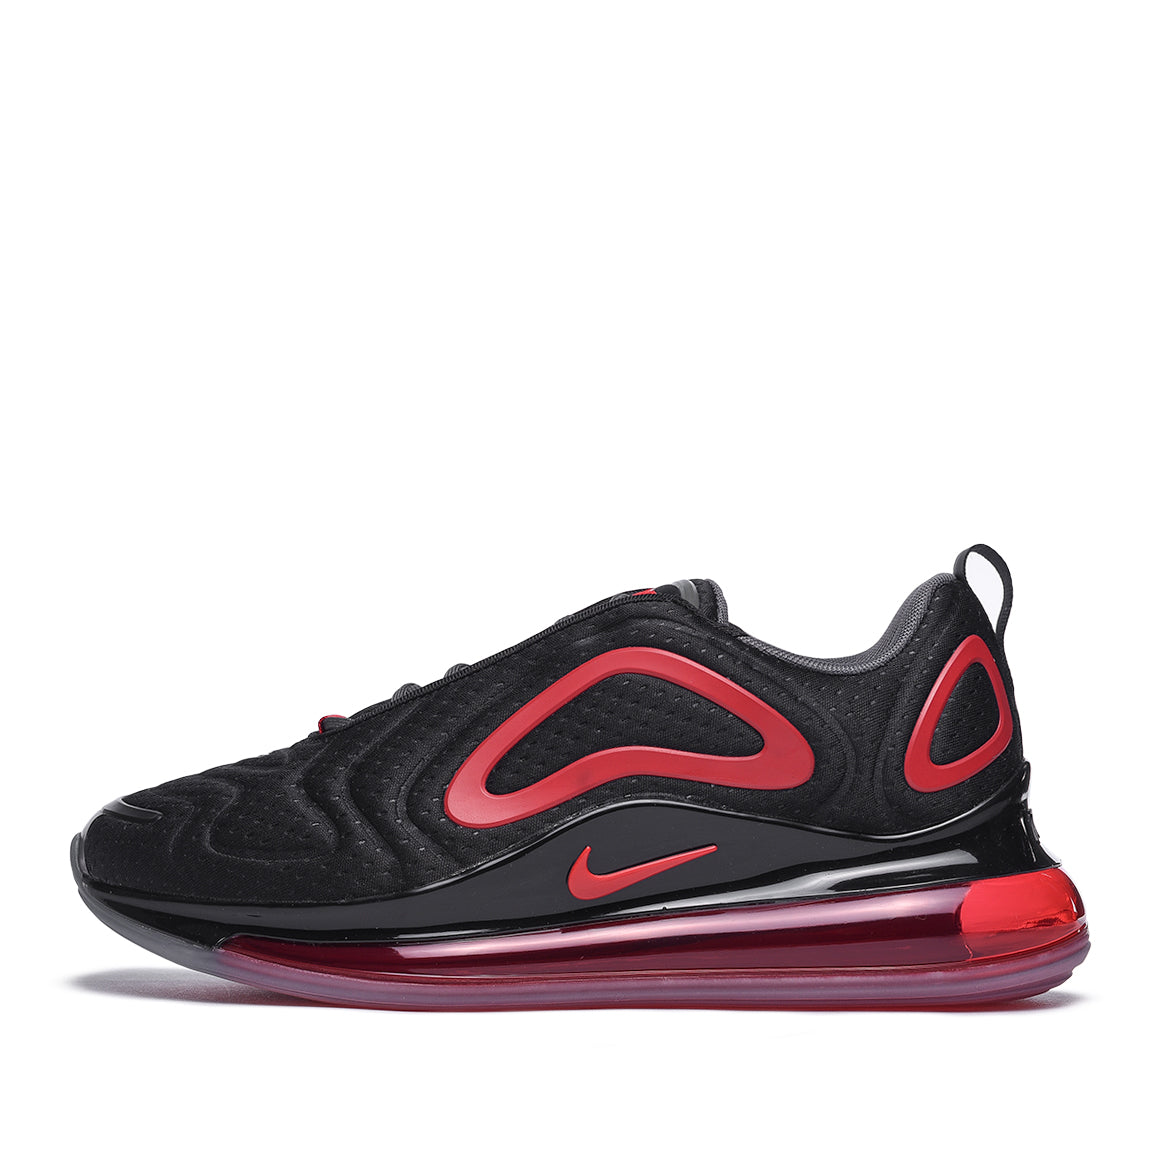 red black and gold air max 720